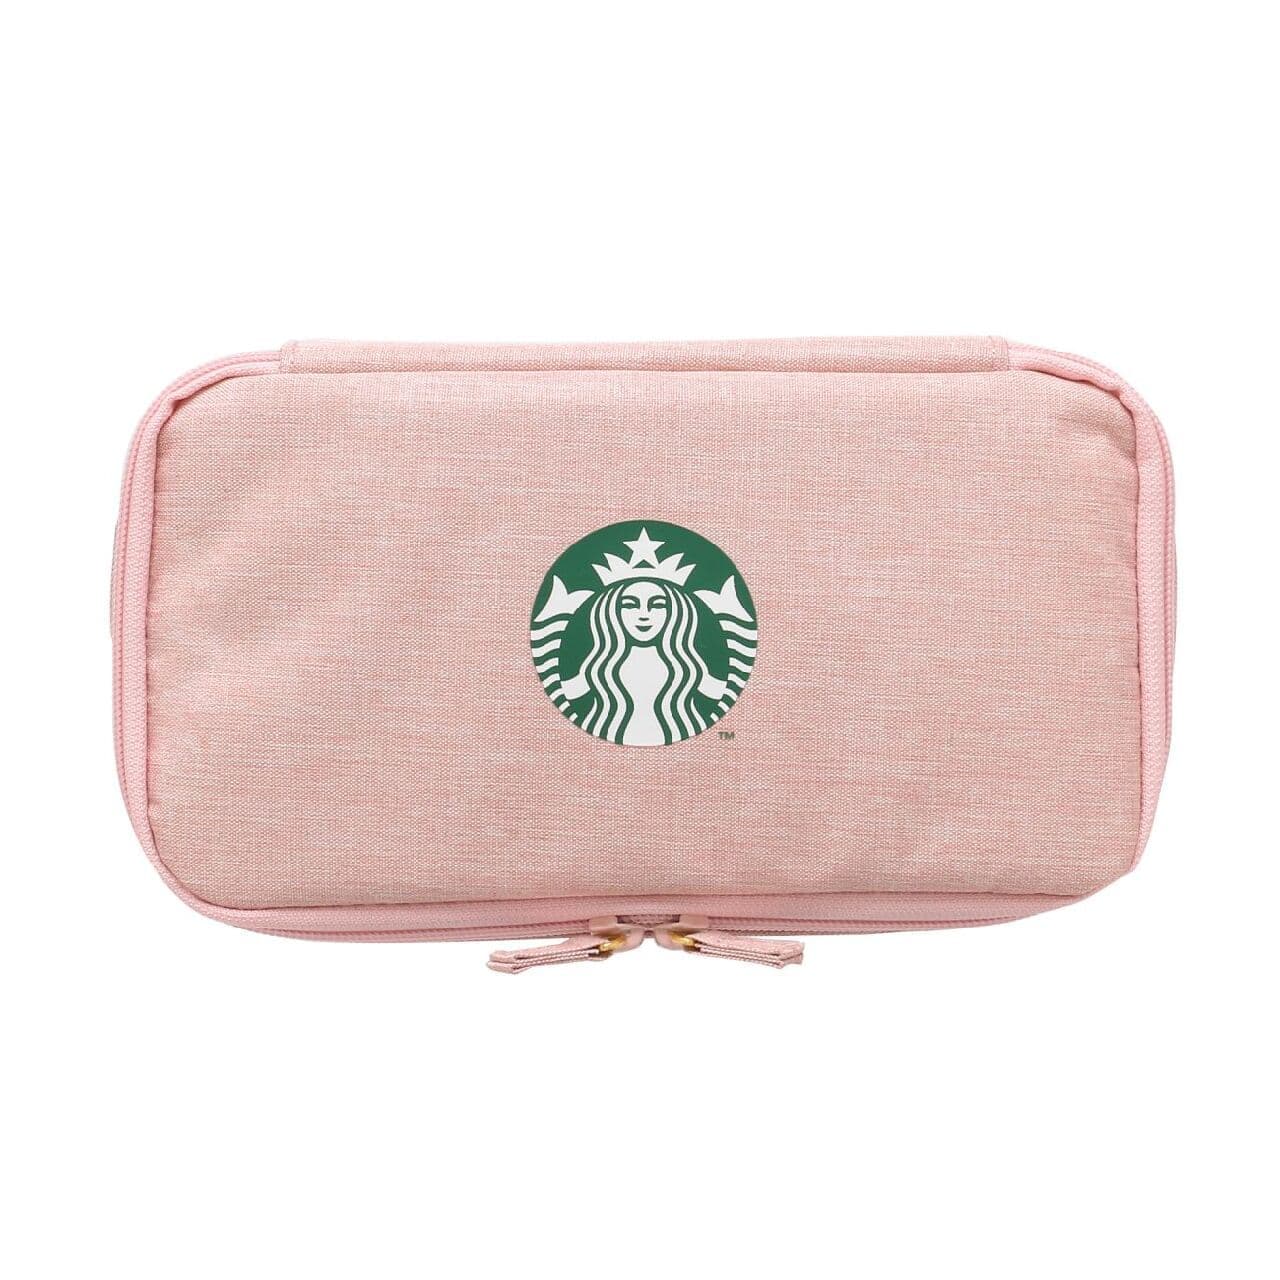 Starbucks Online Store Limited Edition Collection -- Cute Pink Shopper Bags, Pouches, etc.